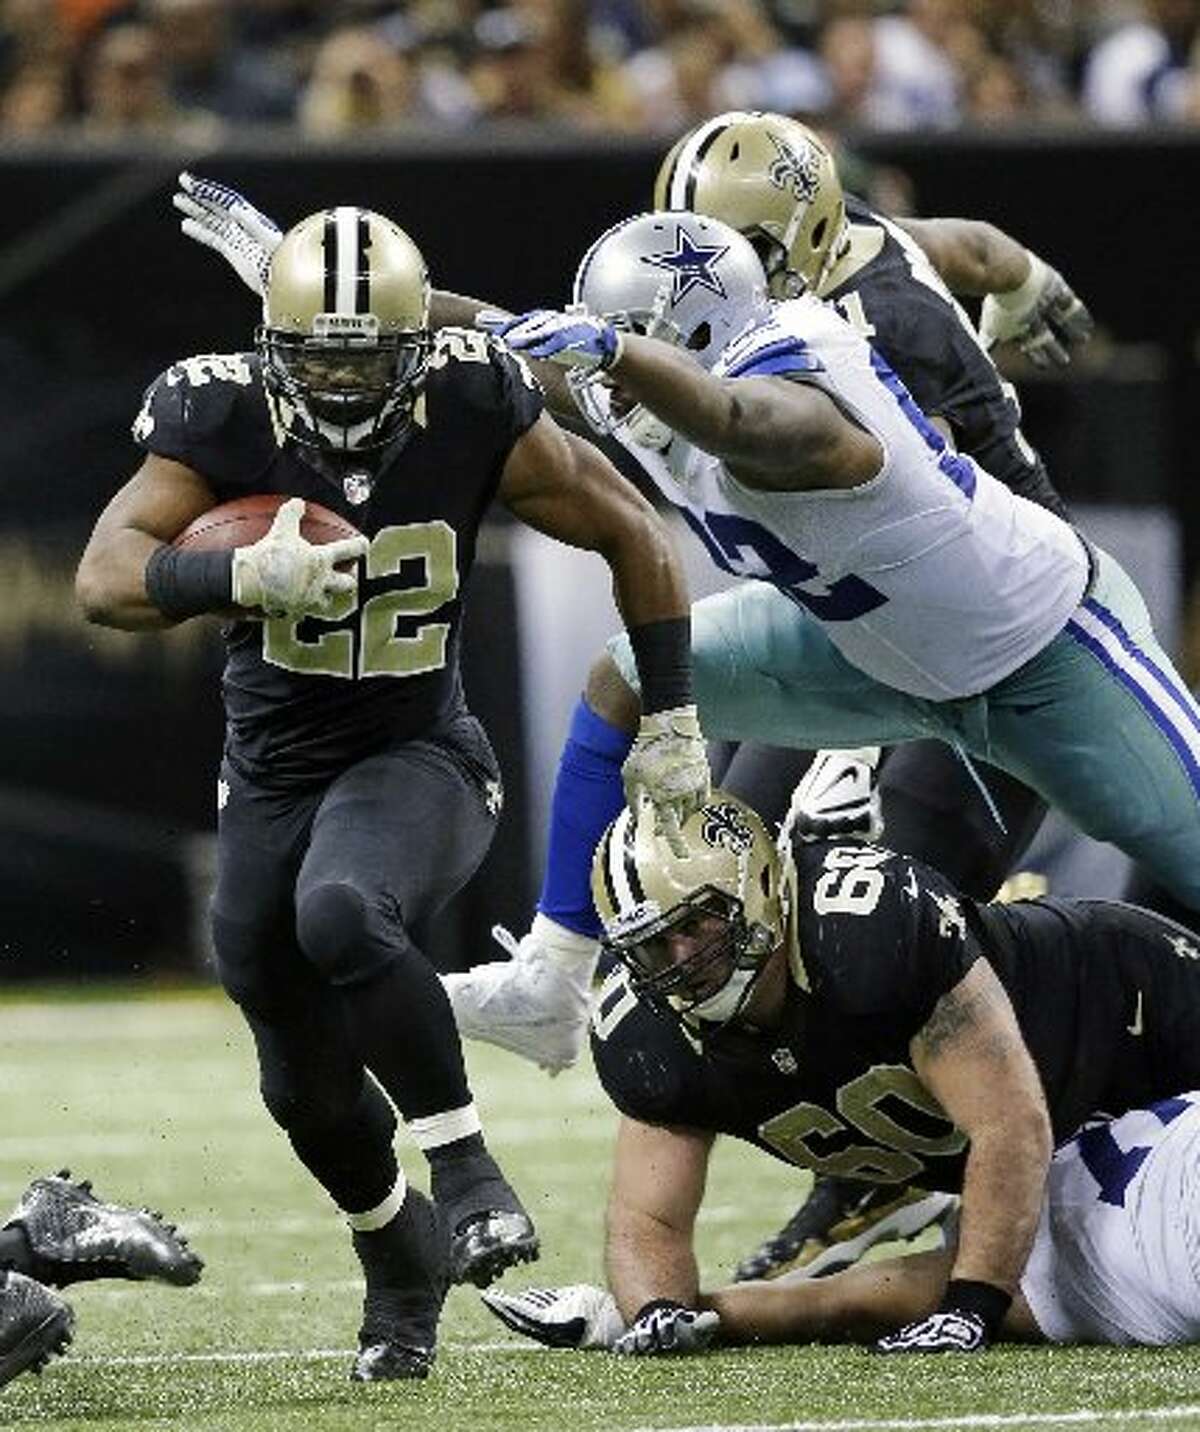 New Orleans running back Mark Ingram (22) rushes past Dallas Cowboys defensive end Jarius Wynn (92) in the second half of Sunday’s game in New Orleans. Dave Martin/AP